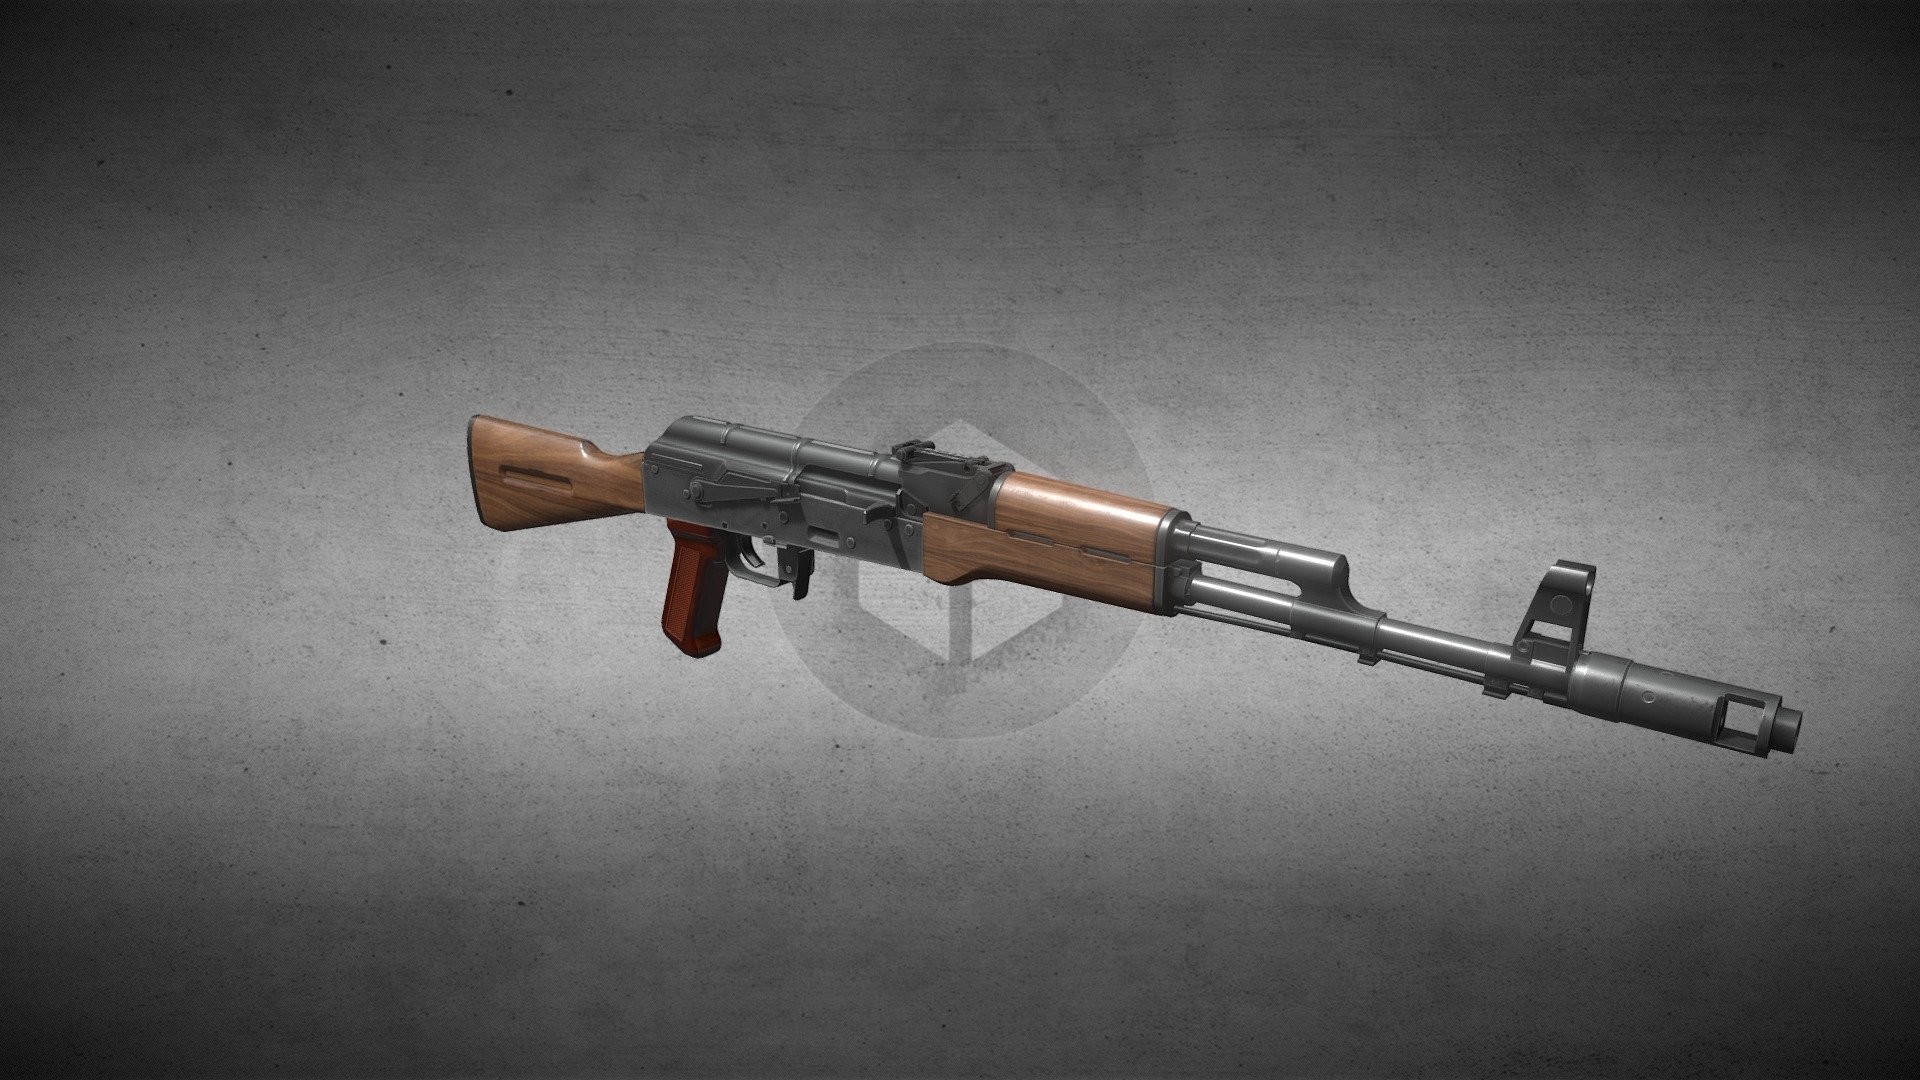 This Asset is part of

[MWS] Modular Weapon System

Asset Project, targeted to create semi-detailed game ready Weapon Models based on popular Weapon Platforms with a variety of changeable Parts for enhanced Gunsmith Features in Games.



AK-74

Included Parts:

  - Receiver

  - Trigger Group
  - Front Trunnion

  - Rear Trunnion

  - Bolt Carrier Group

  - Spring Rod

  - Barrel

  - Muzzle Brake

  - Front Sight Block

  - Front Sight Post
  - Gas Block

  - Gas Tube

  - Rear Sight Block

  - Rear Sight Leaf

  - Upper Handguard

  - Lower Handguard

  - Pistol Grip

  - Stock
 - [MWS] AK-74 - 3D model by BayernMaik 3d model